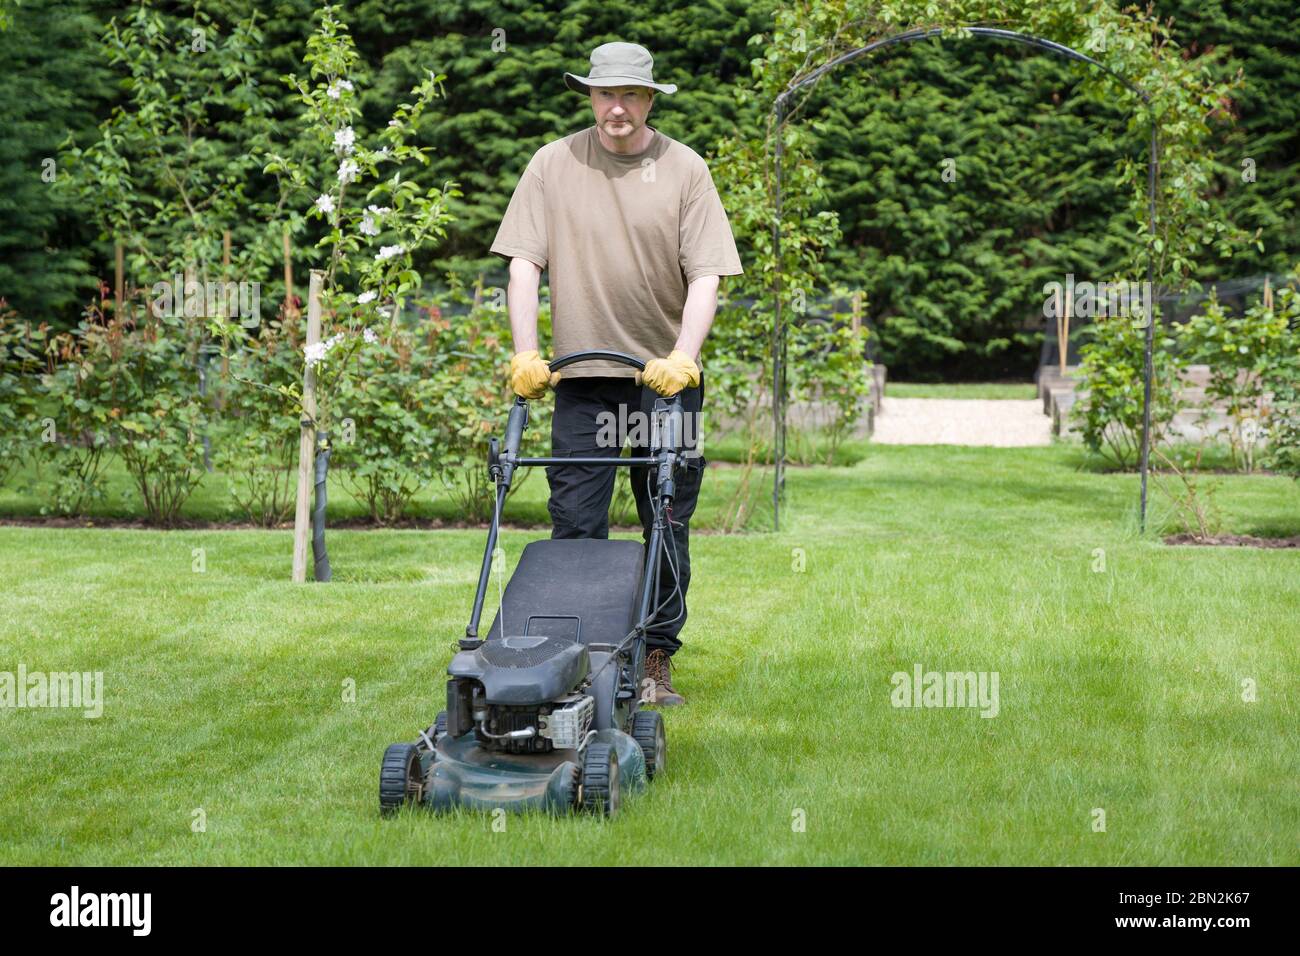 Man mowing a lawn in the grounds of a luxury home, lawncare and grass maintenance, UK Stock Photo